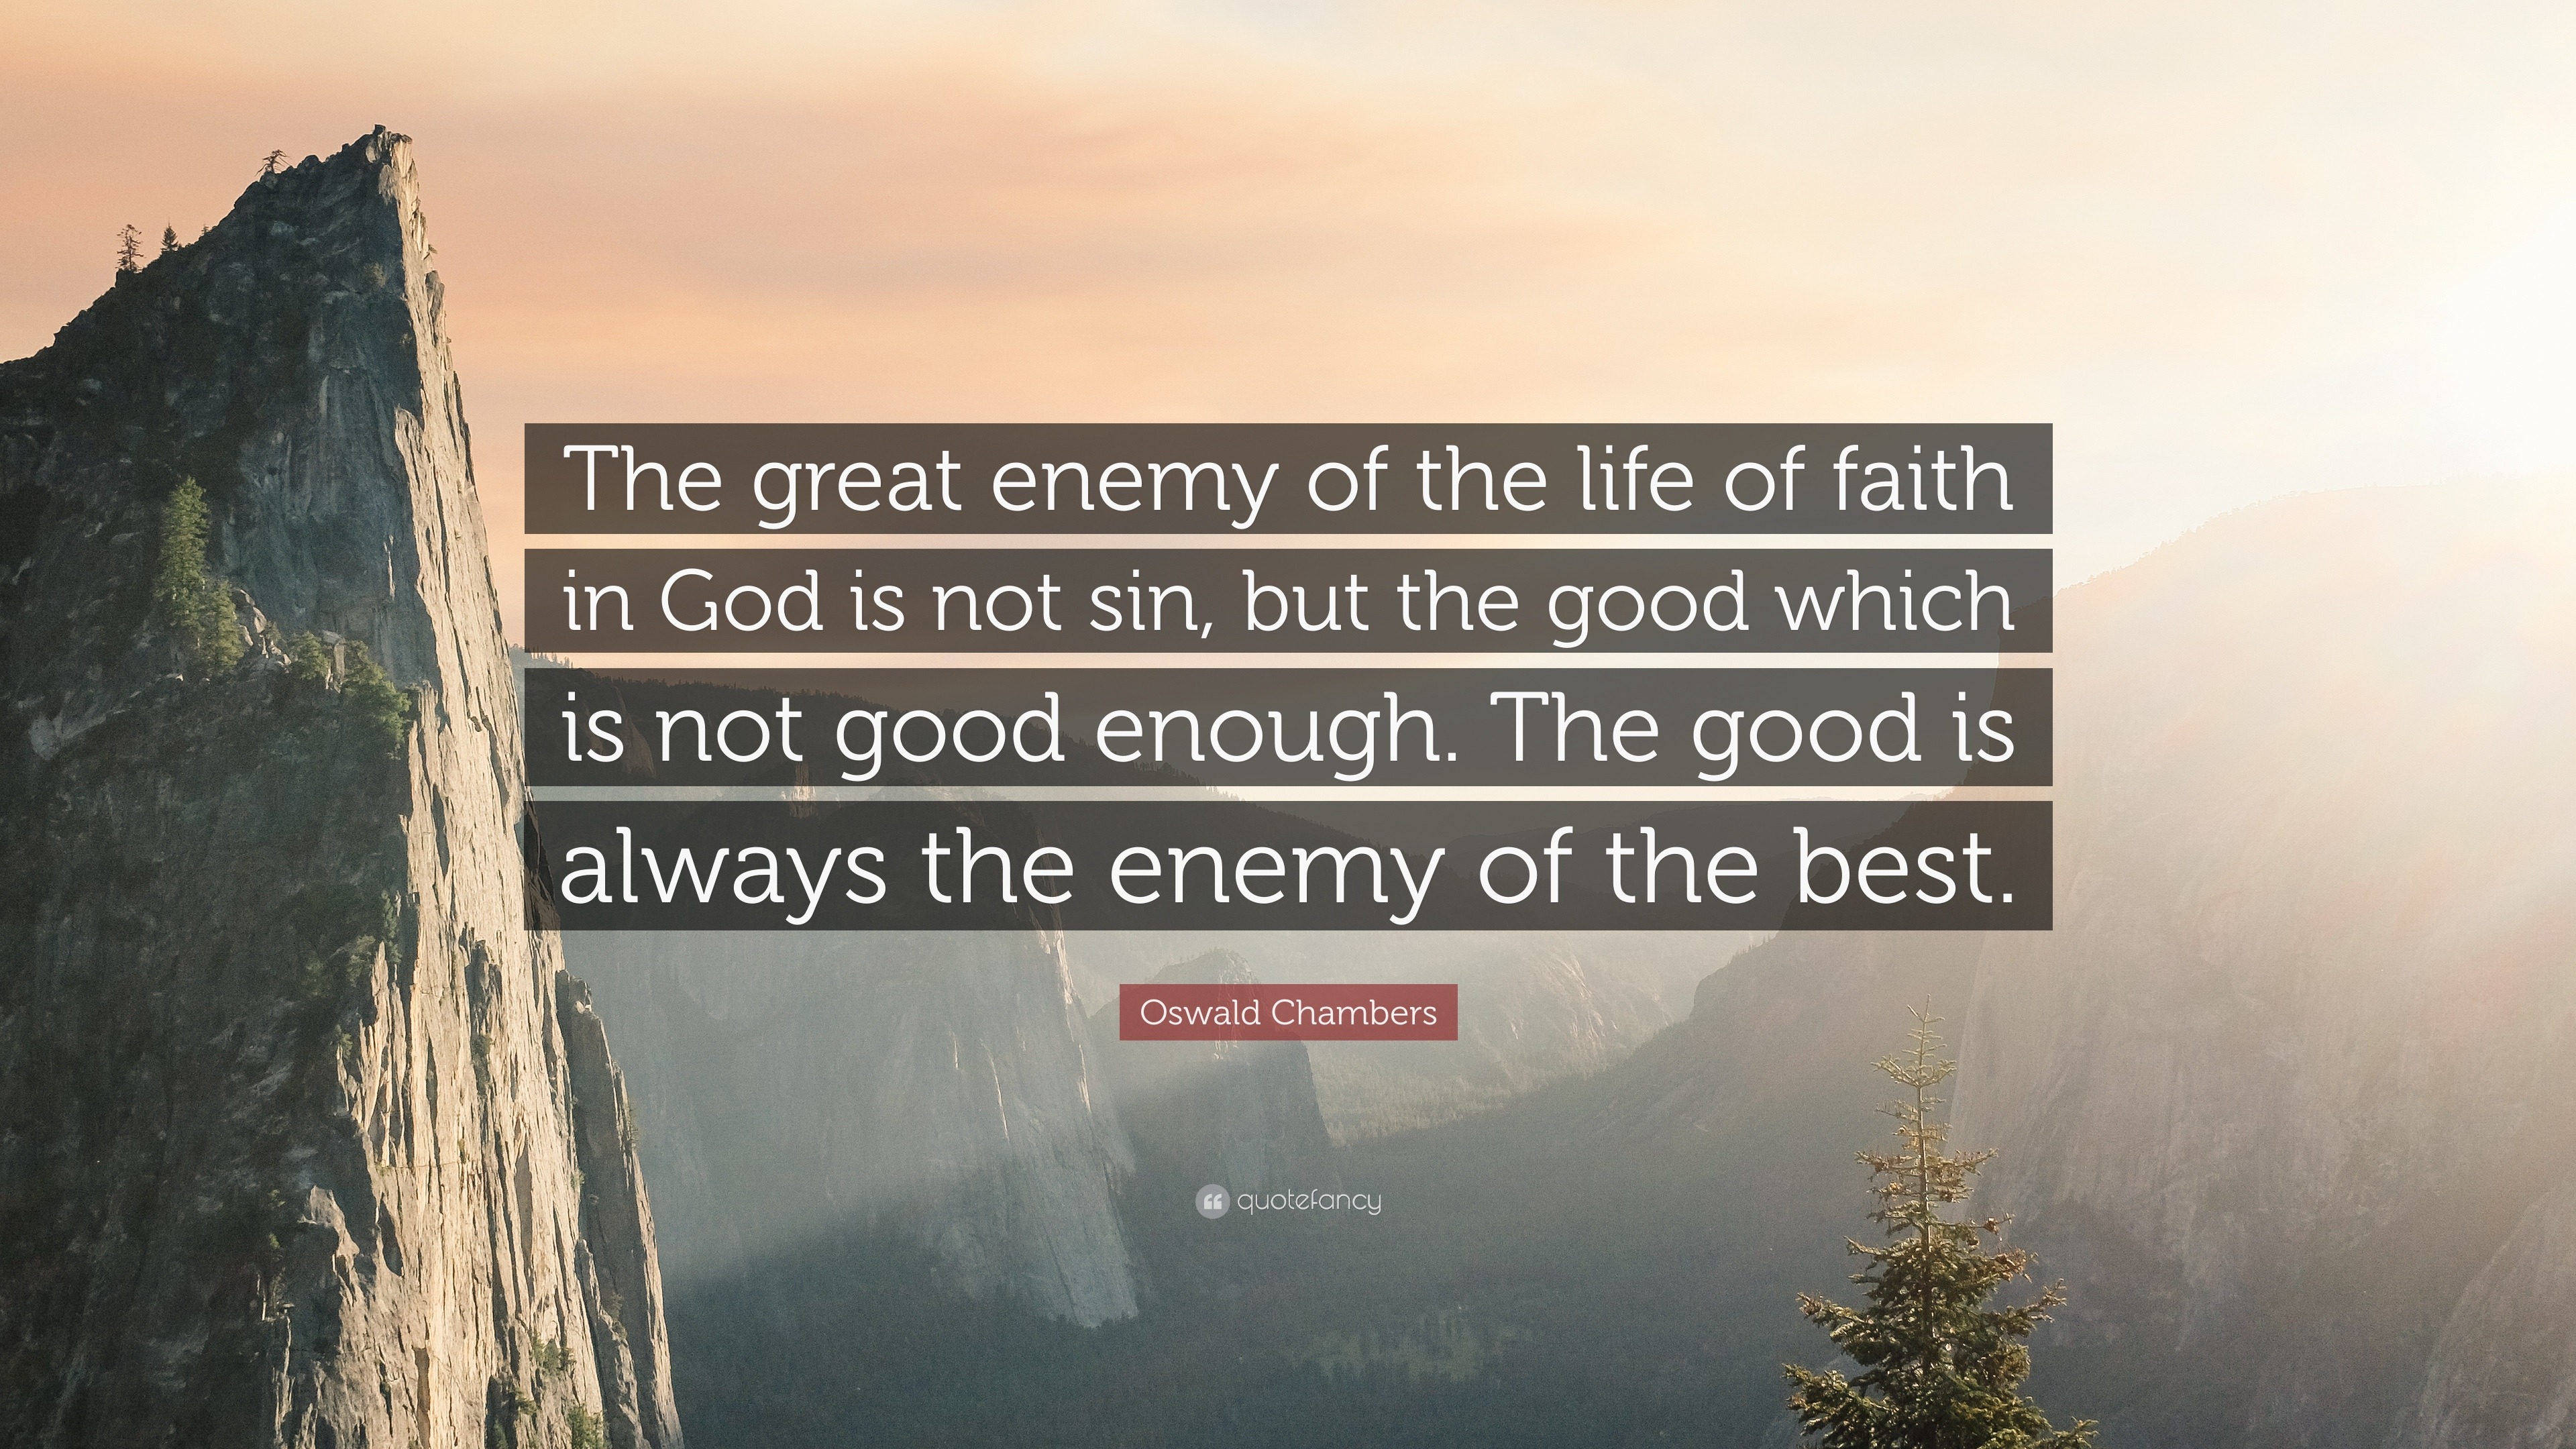 Oswald Chambers Quote “The great enemy of the life of faith in God is